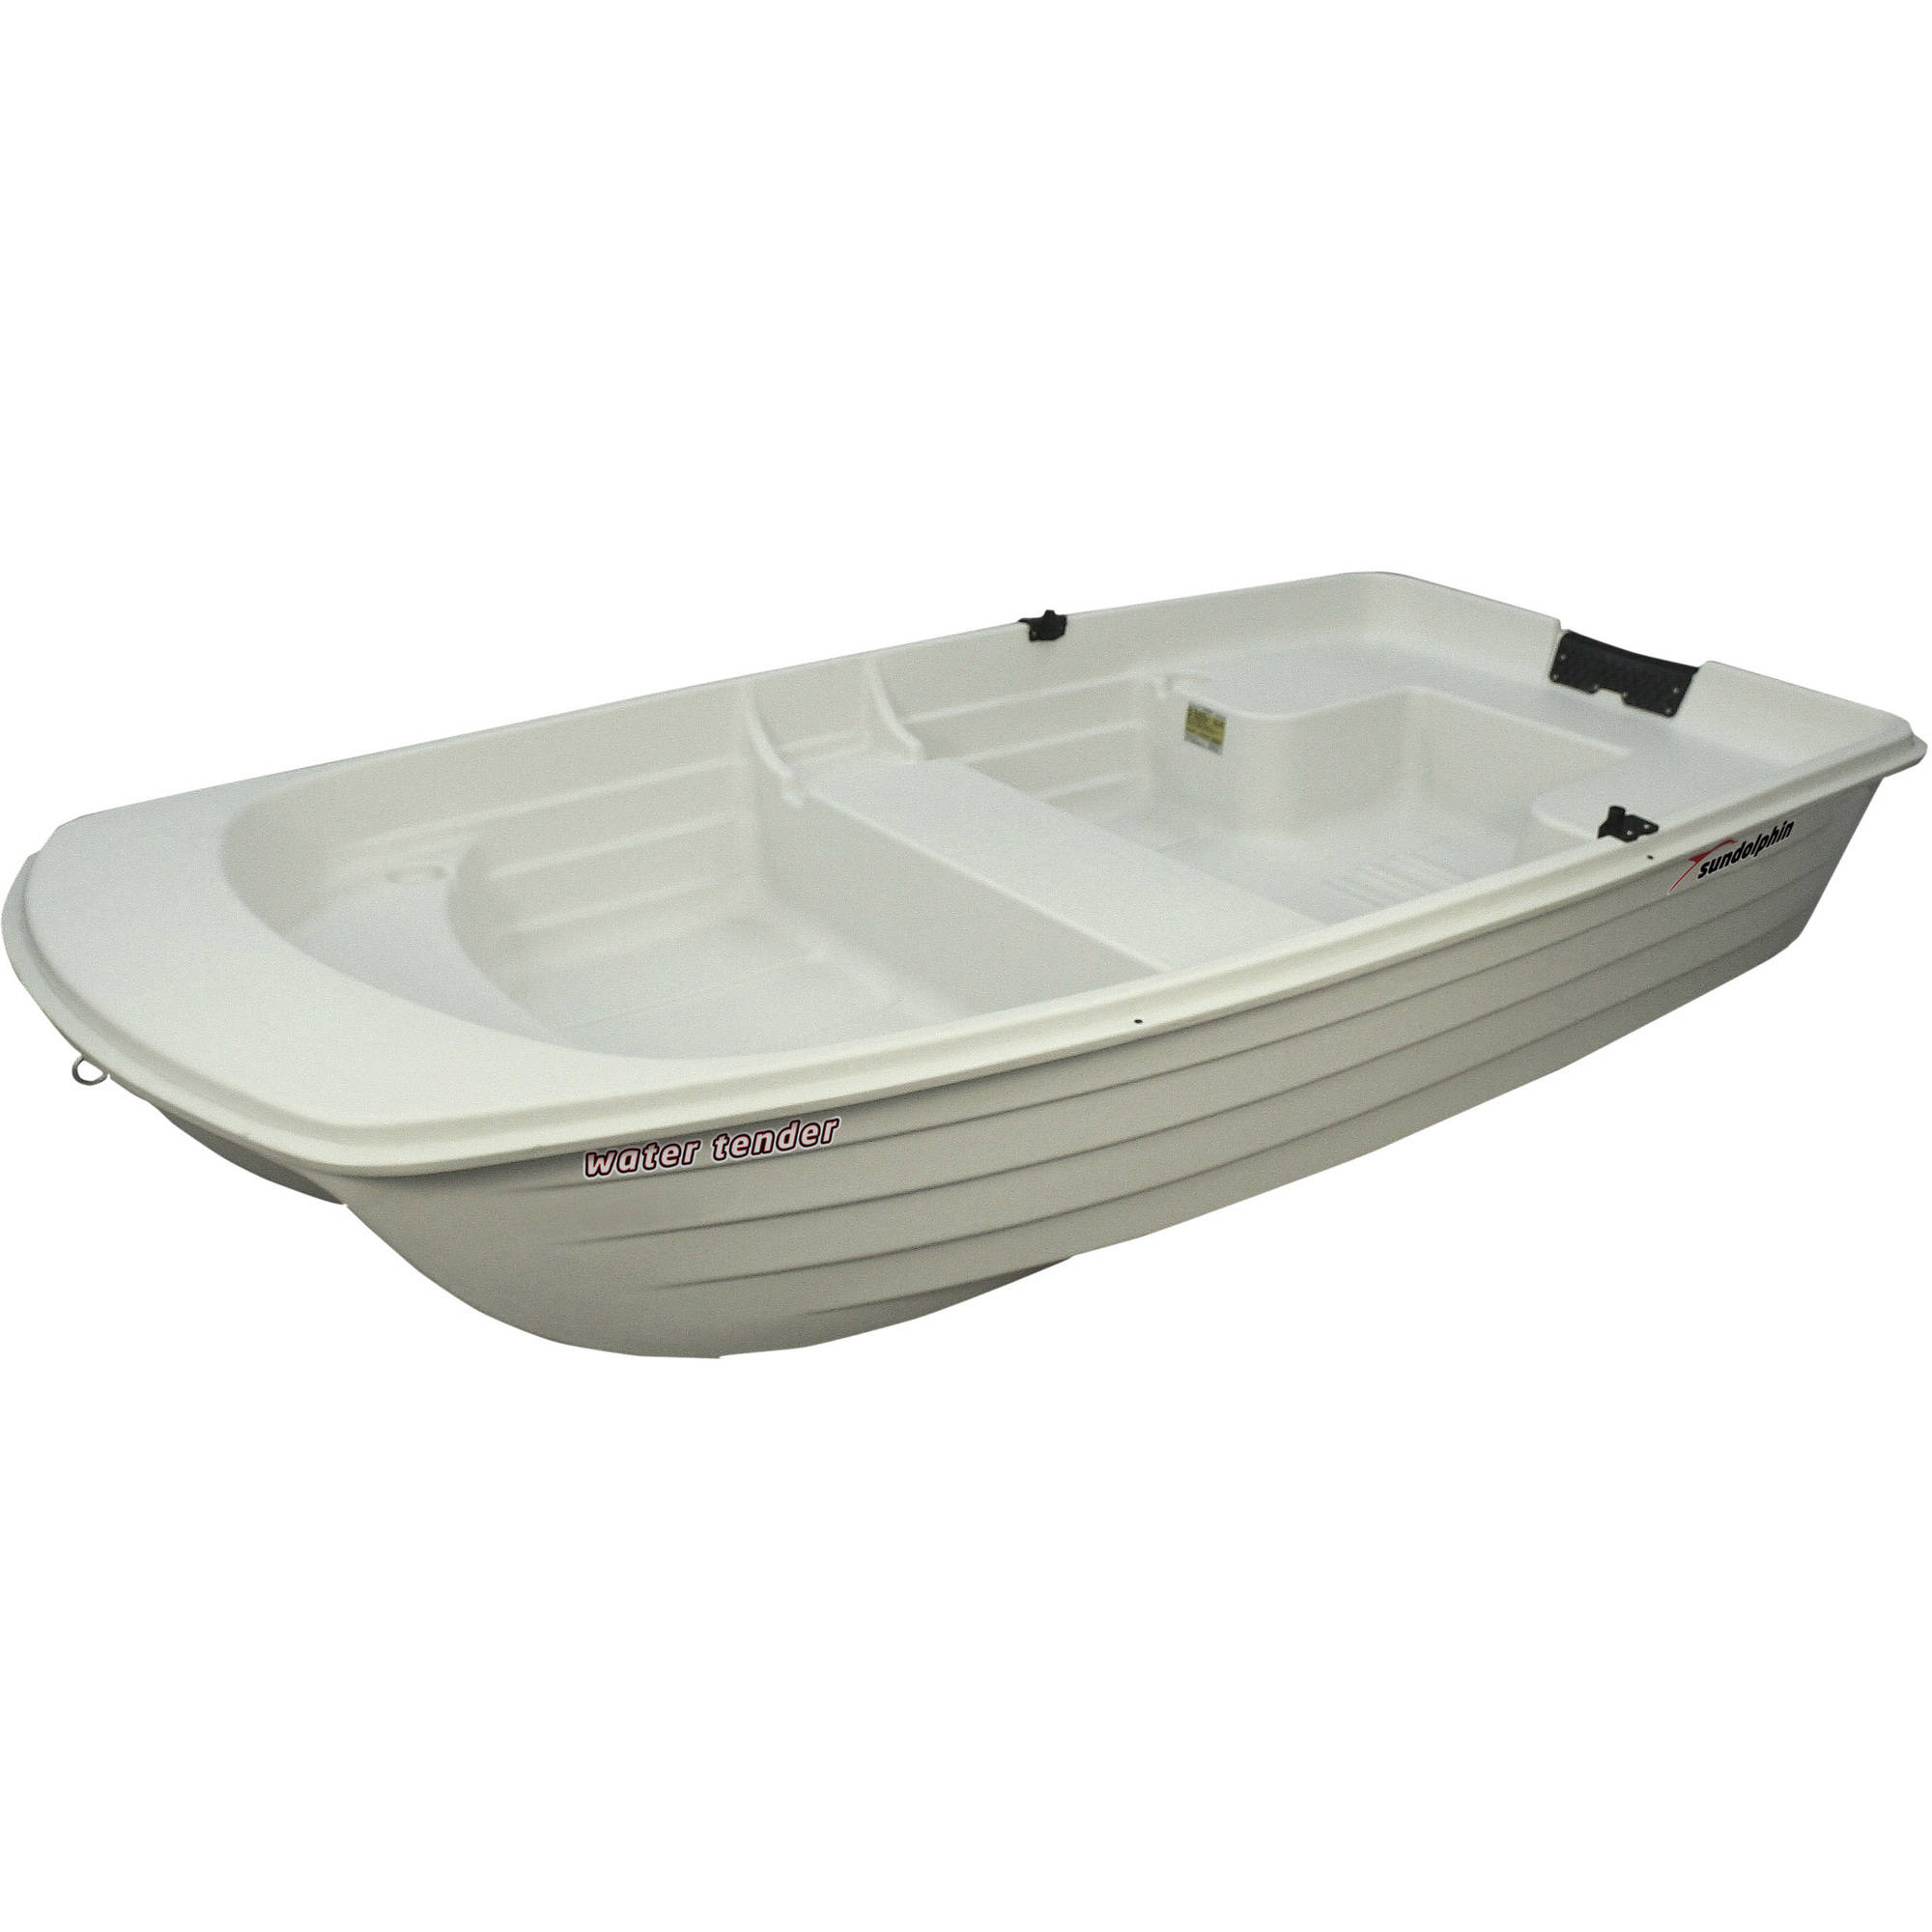 Sun Dolphin Water Tender 9.4' Dinghy Portable Row Boat, Cloud White - image 1 of 4